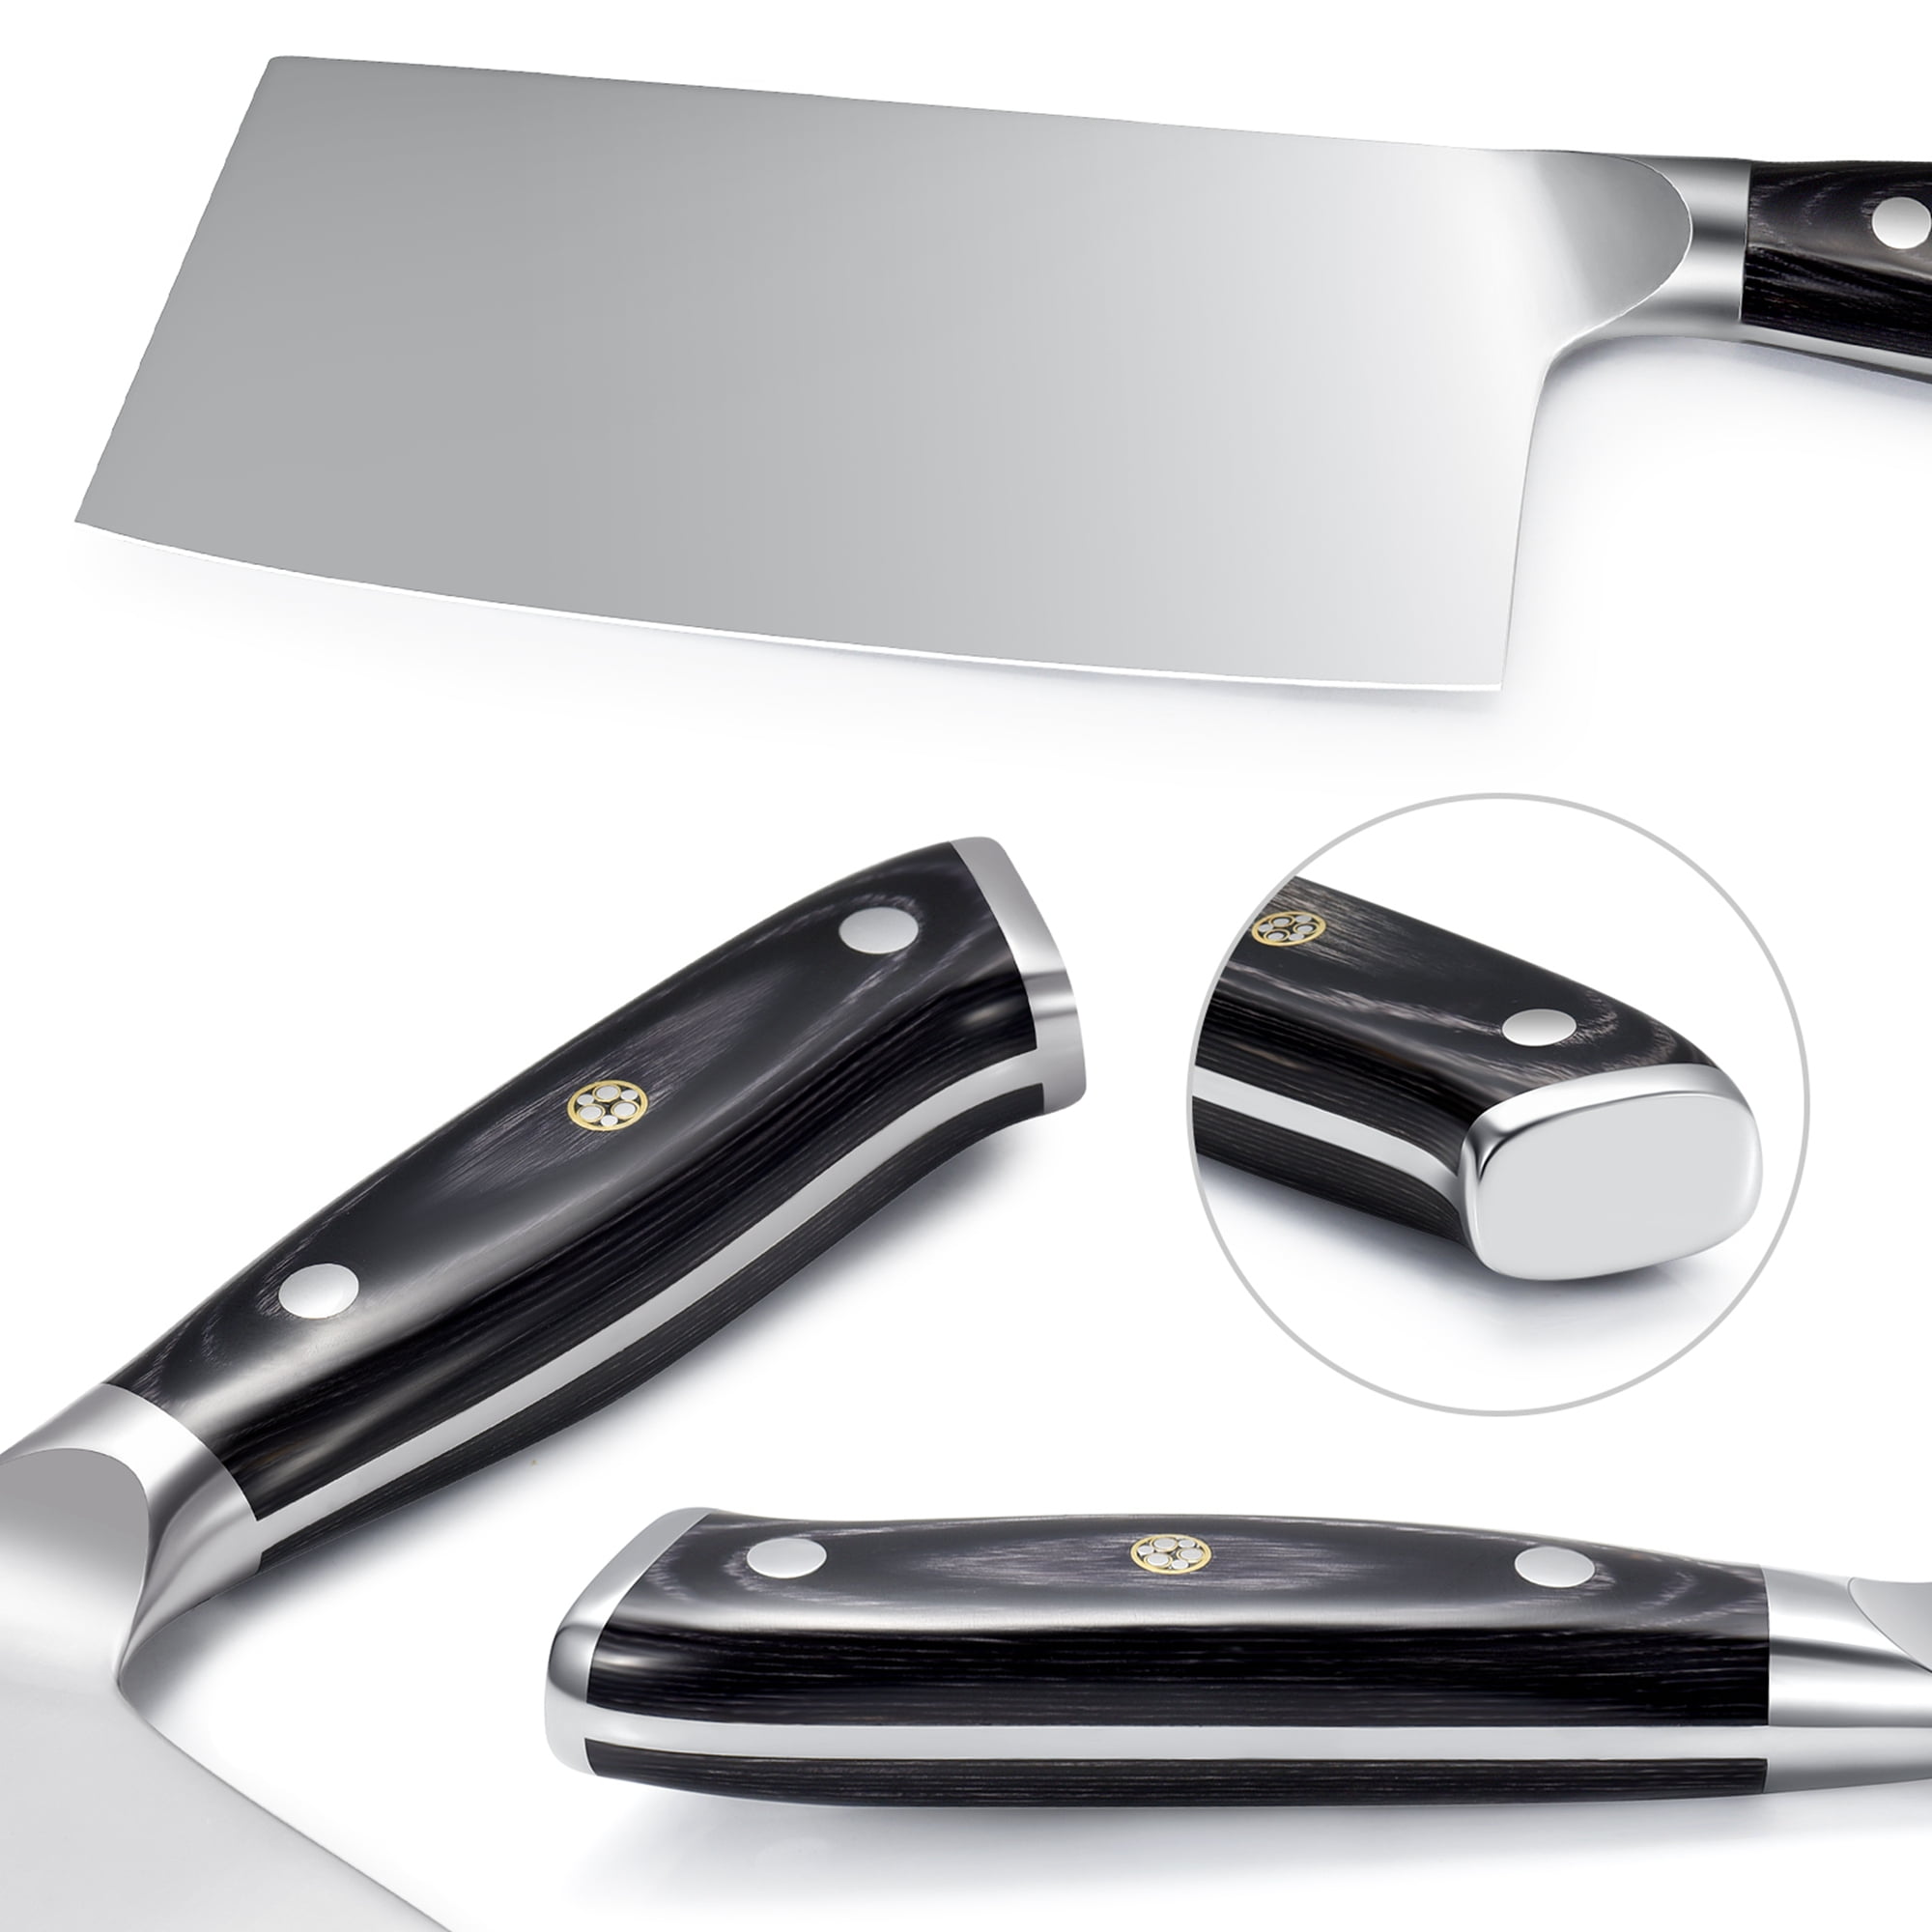 GLOBAL Stainless Steel 6.25 Meat Cleaver - Macy's